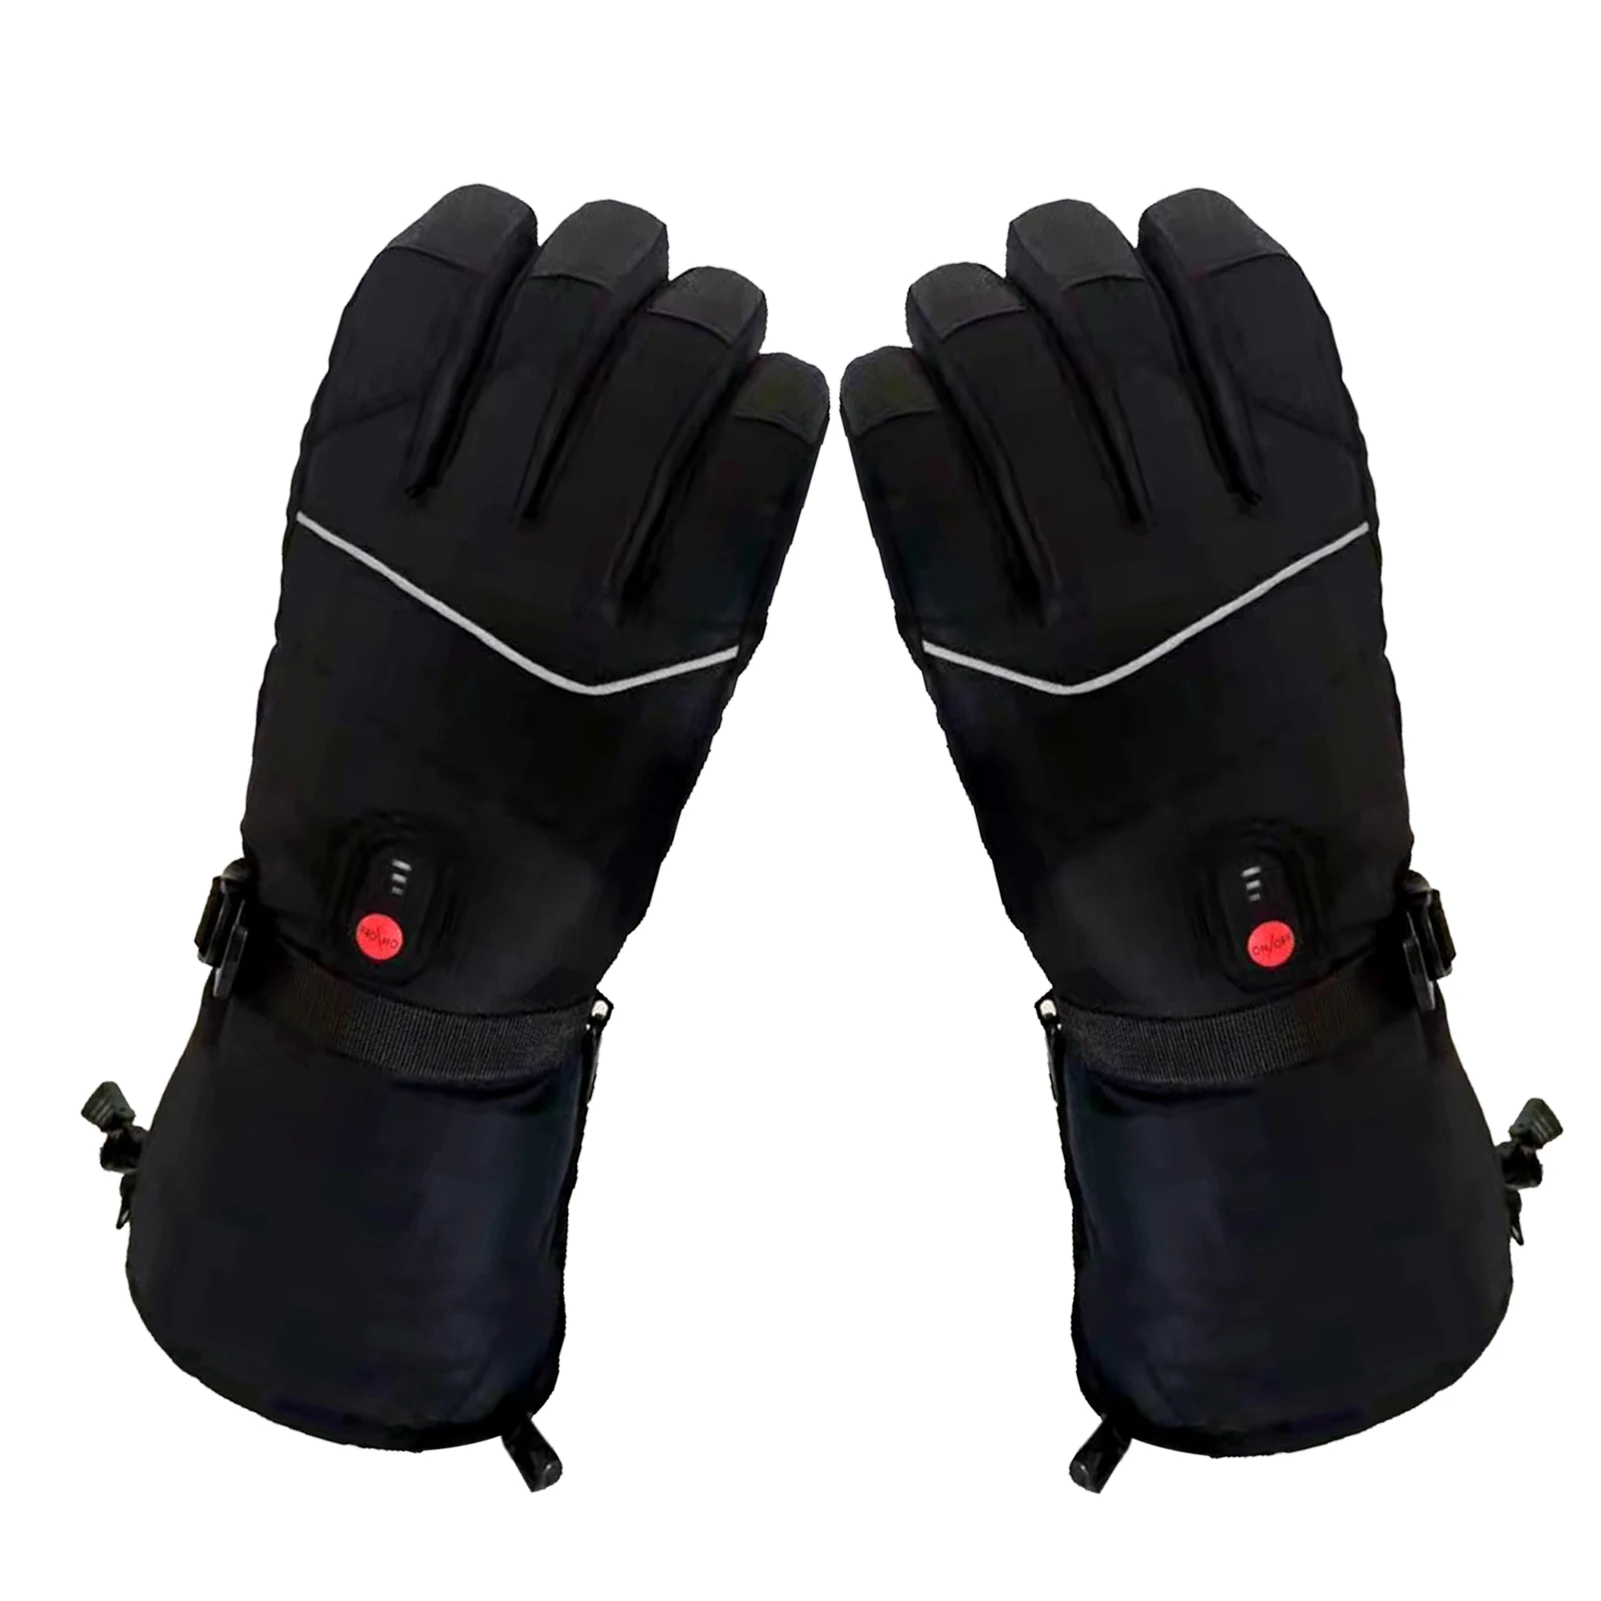 

Winter Thermal Gloves Electric Heated Gloves 5V USB Rechargeable 3 Temperature Heating Setting Levels Touchscreen Heating Gloves